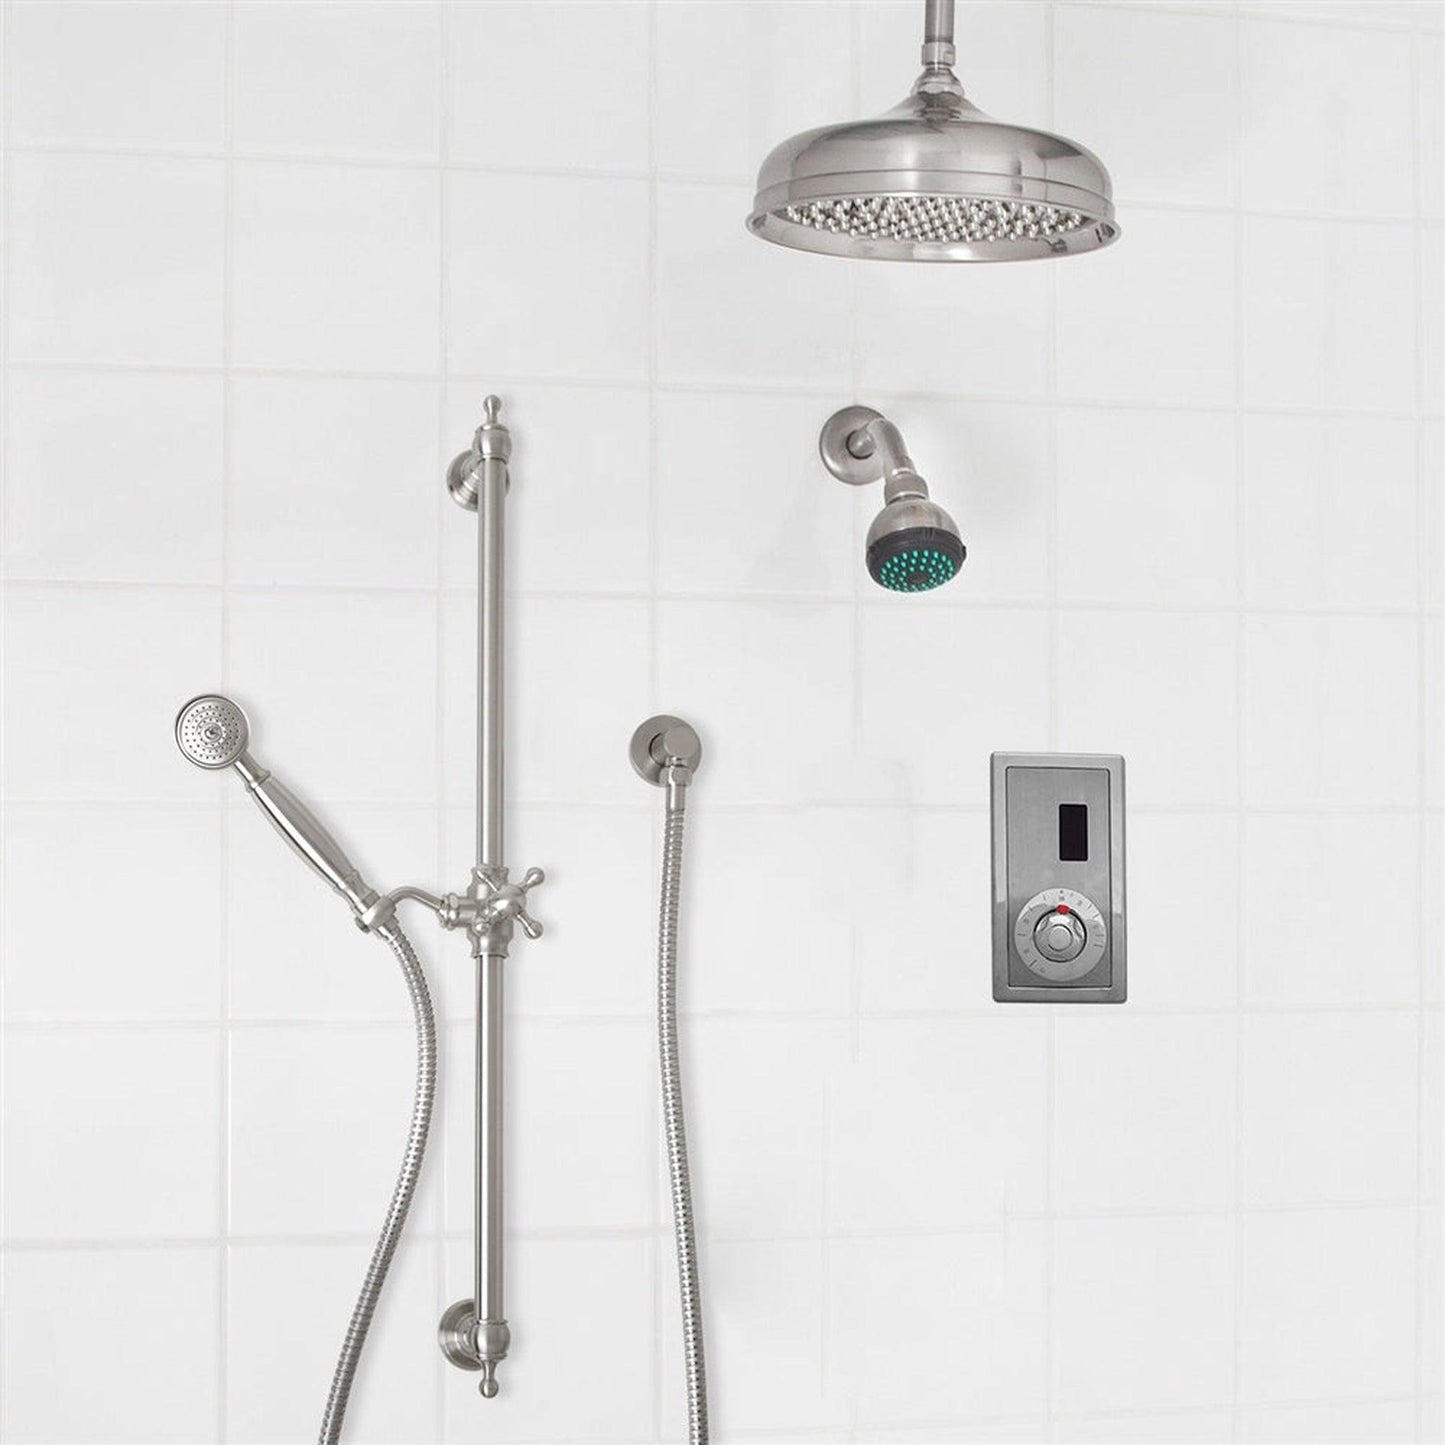 Fontana 12" Brushed Nickel Dual Shower Head Luxury Bathroom Automatic Thermostatic Sensor Temperature Dial Shower System With Hand Shower